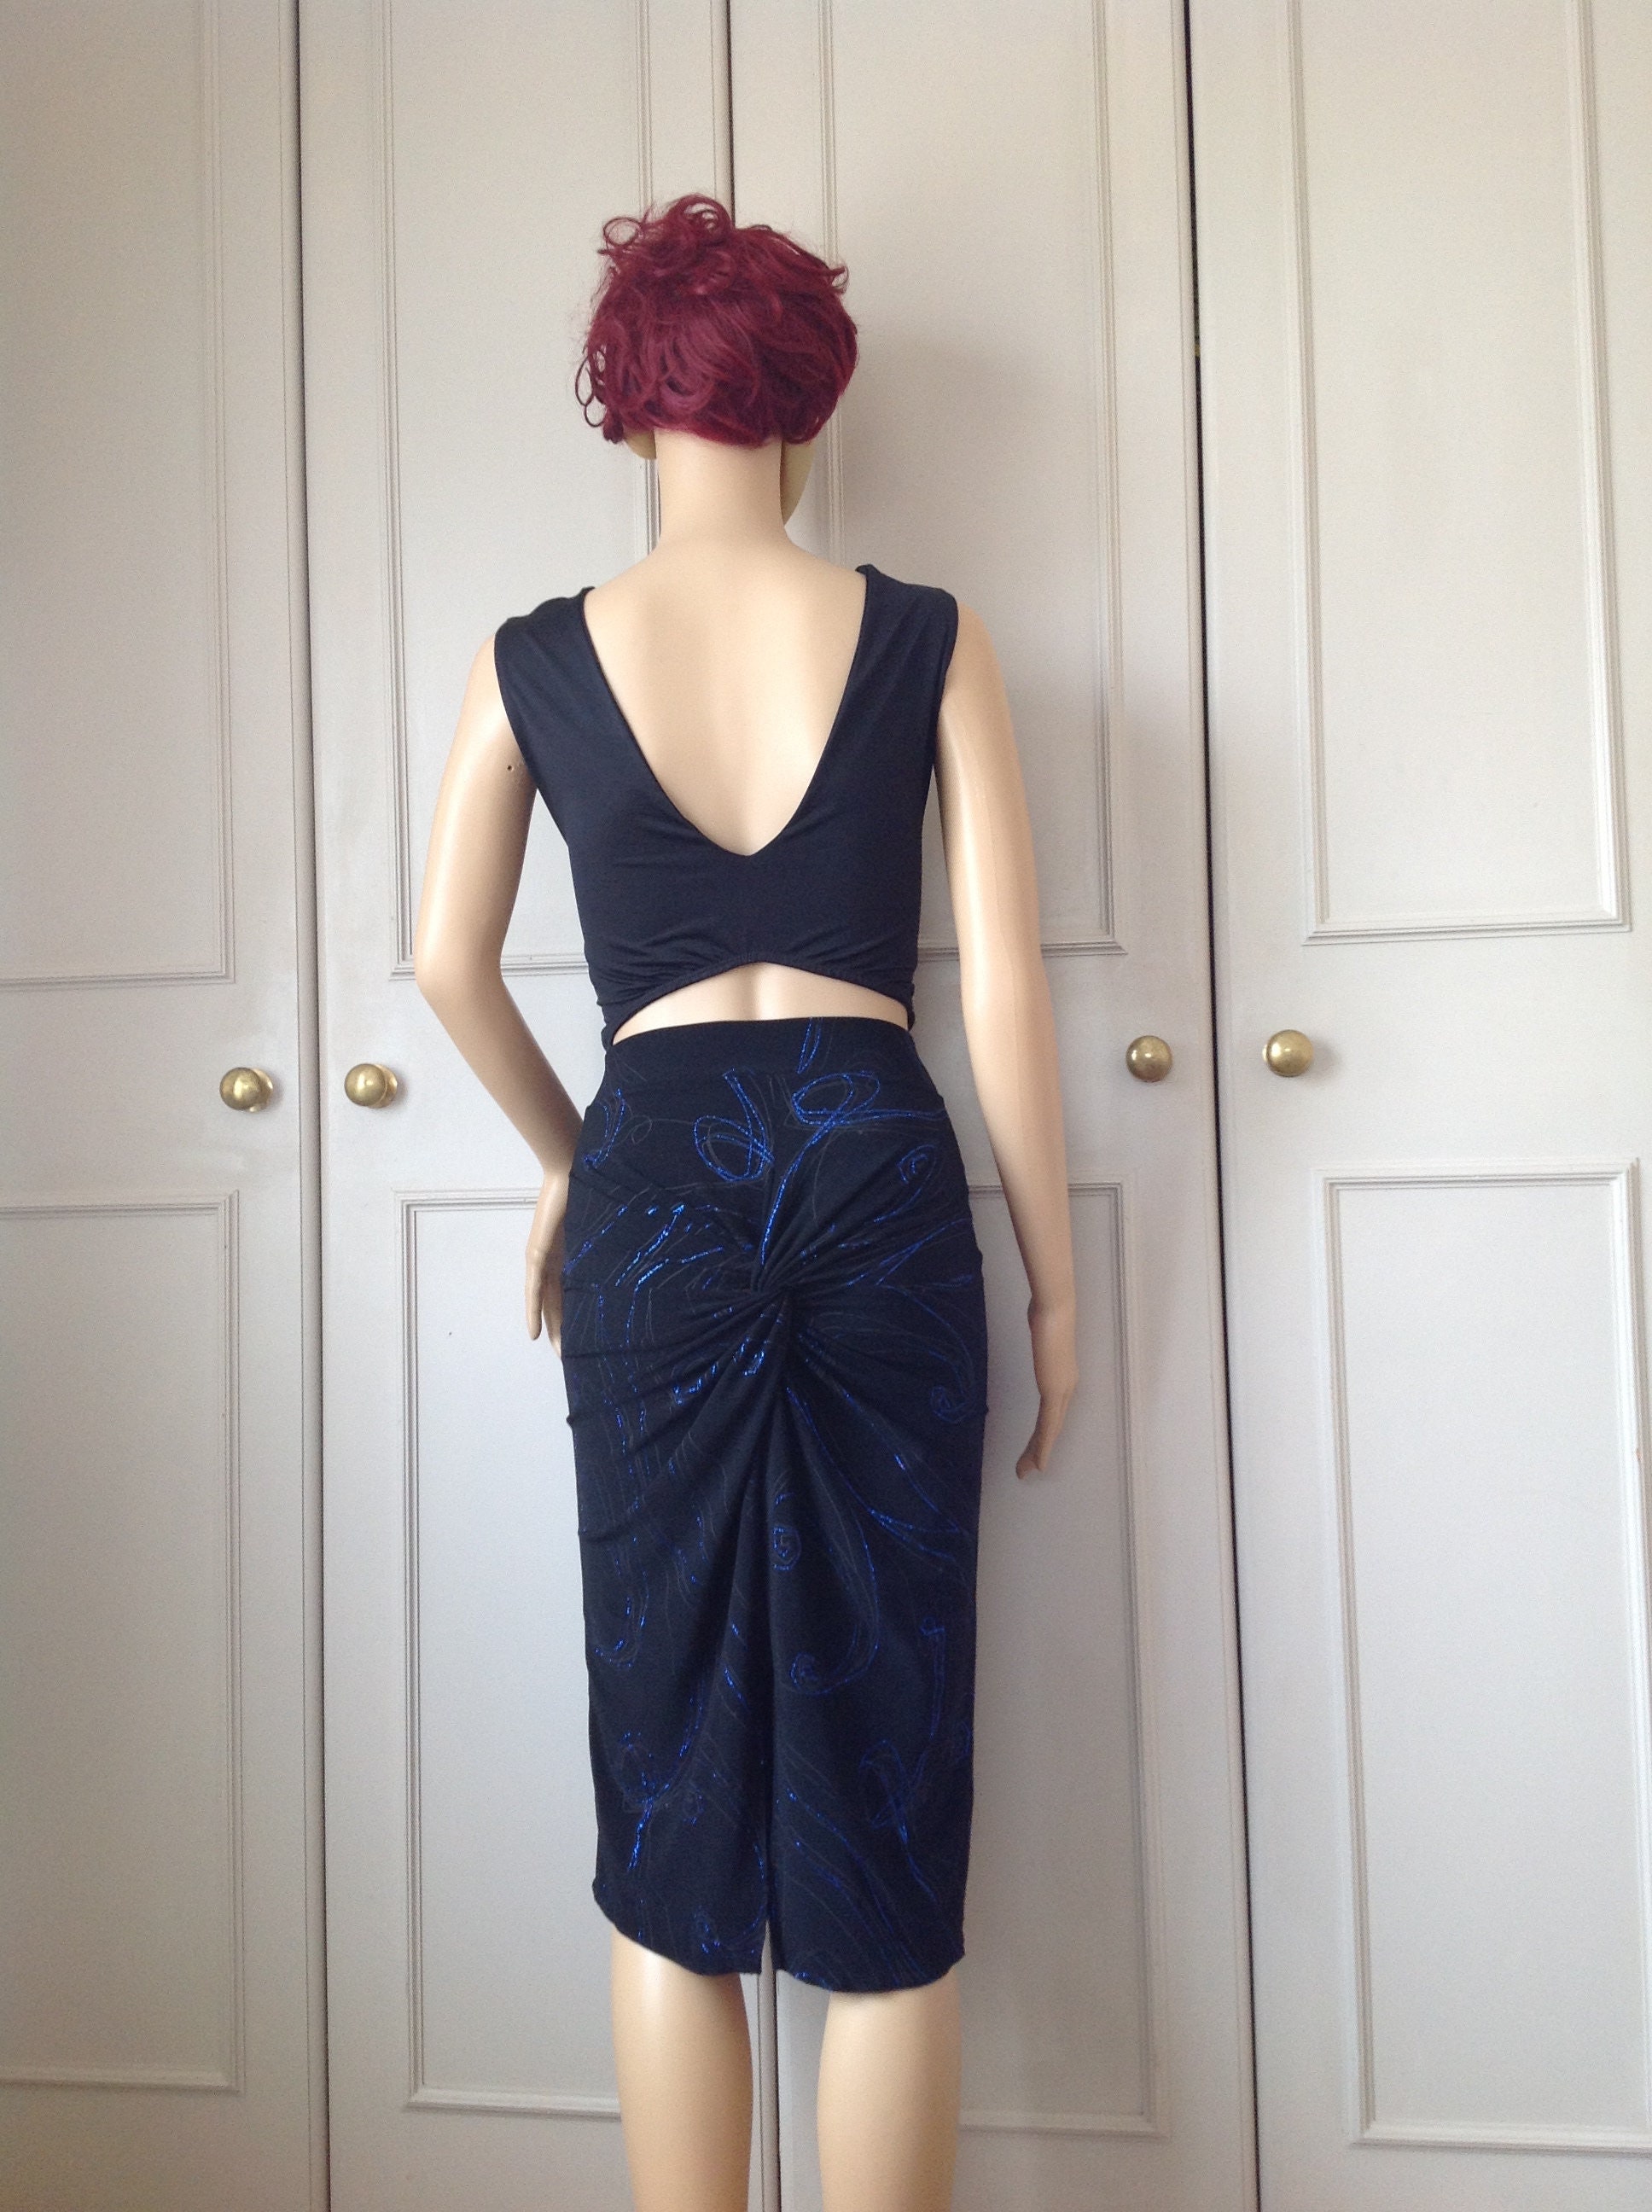 Tango Skirt in Small and Large Sizes - Etsy